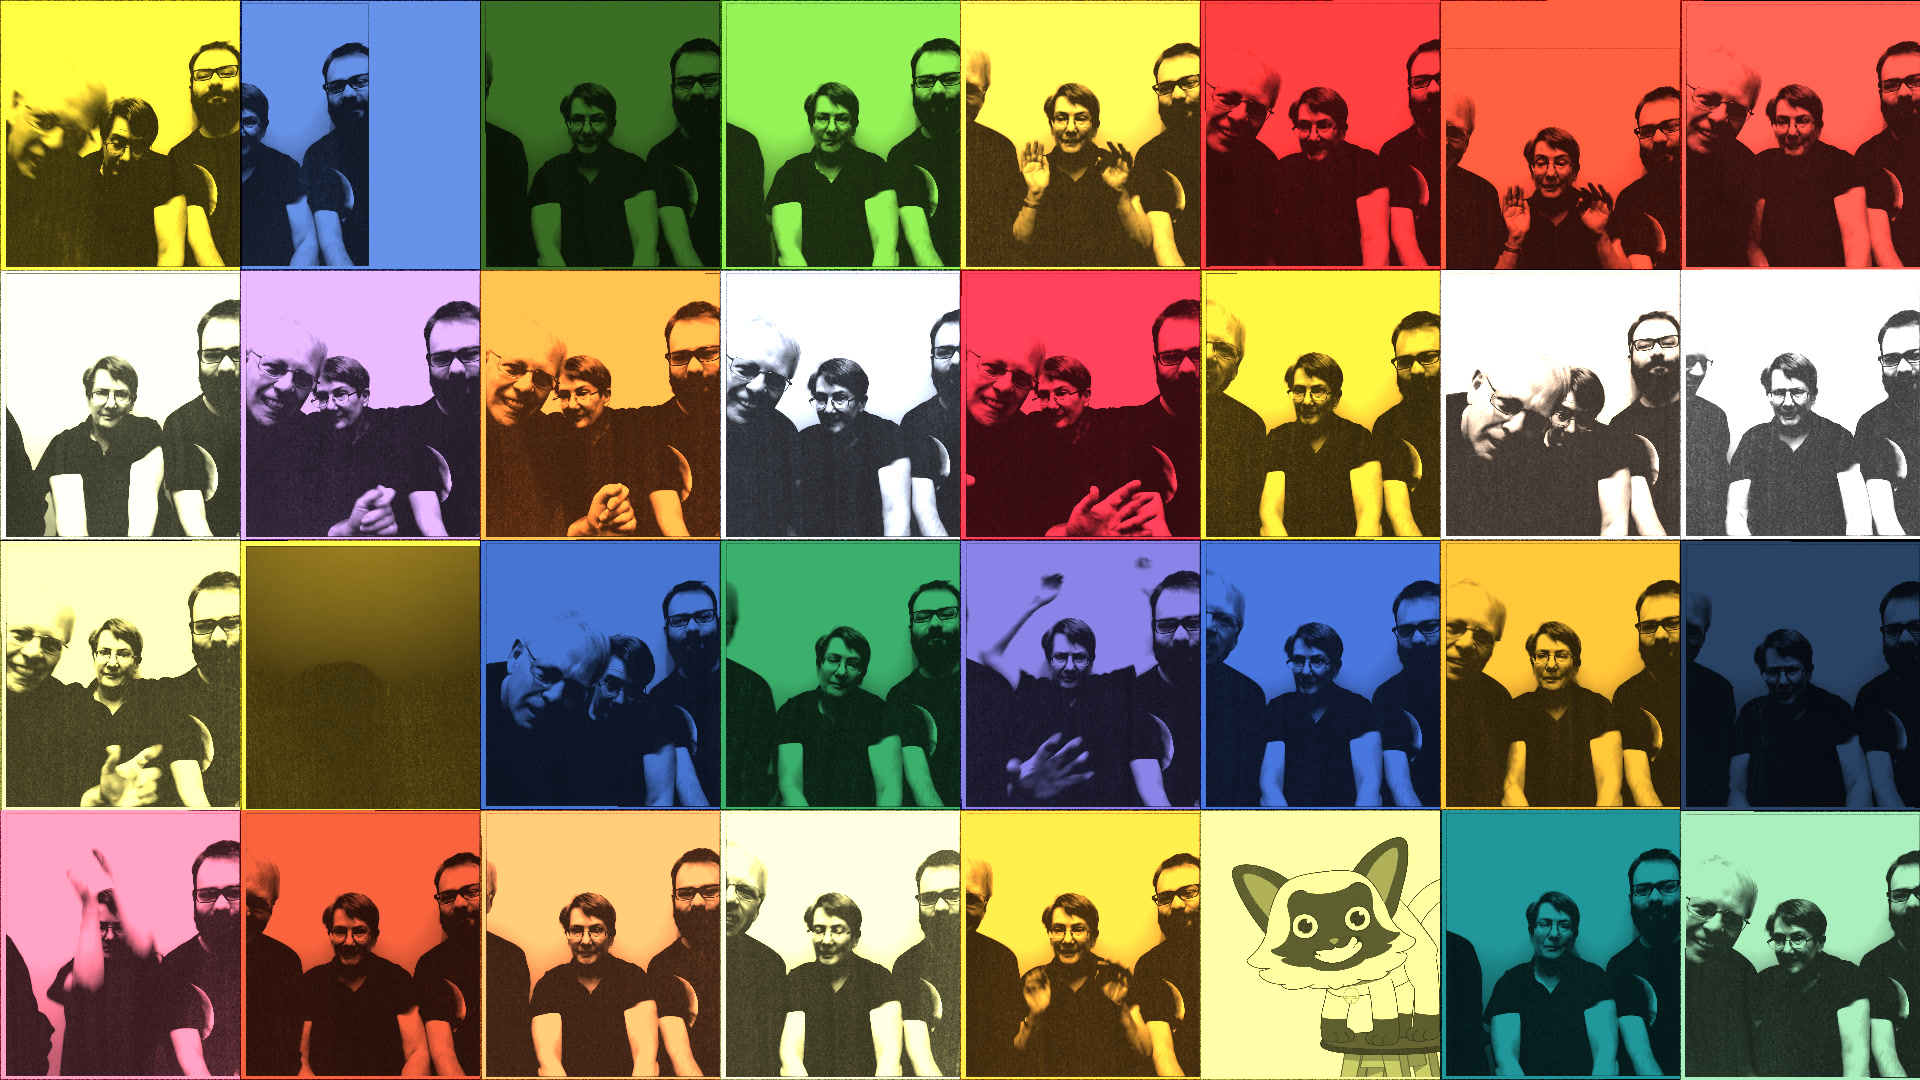 Art generated by Andy Warhol’s Photobooth